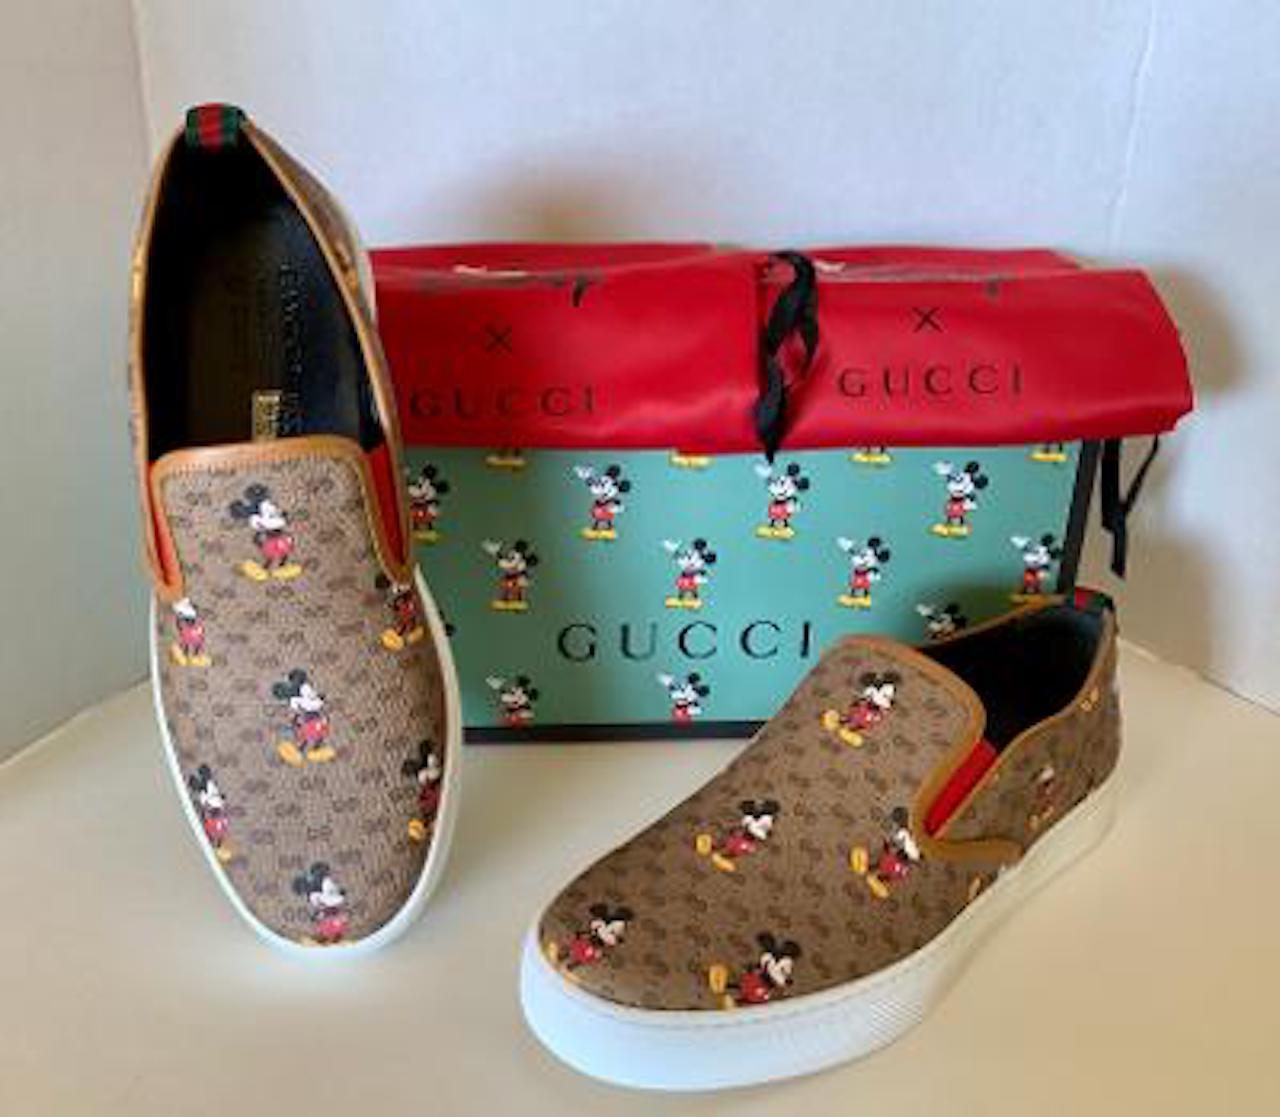 To celebrate the Year of the Rat, Gucci collaborated with Disney (specifically Mickey Mouse) to deliver this very collectible capsule collection. Gucci's iconic GG pattern has been given a Mickey-approved flip!

Get these SOLD OUT, never worn, Gucci